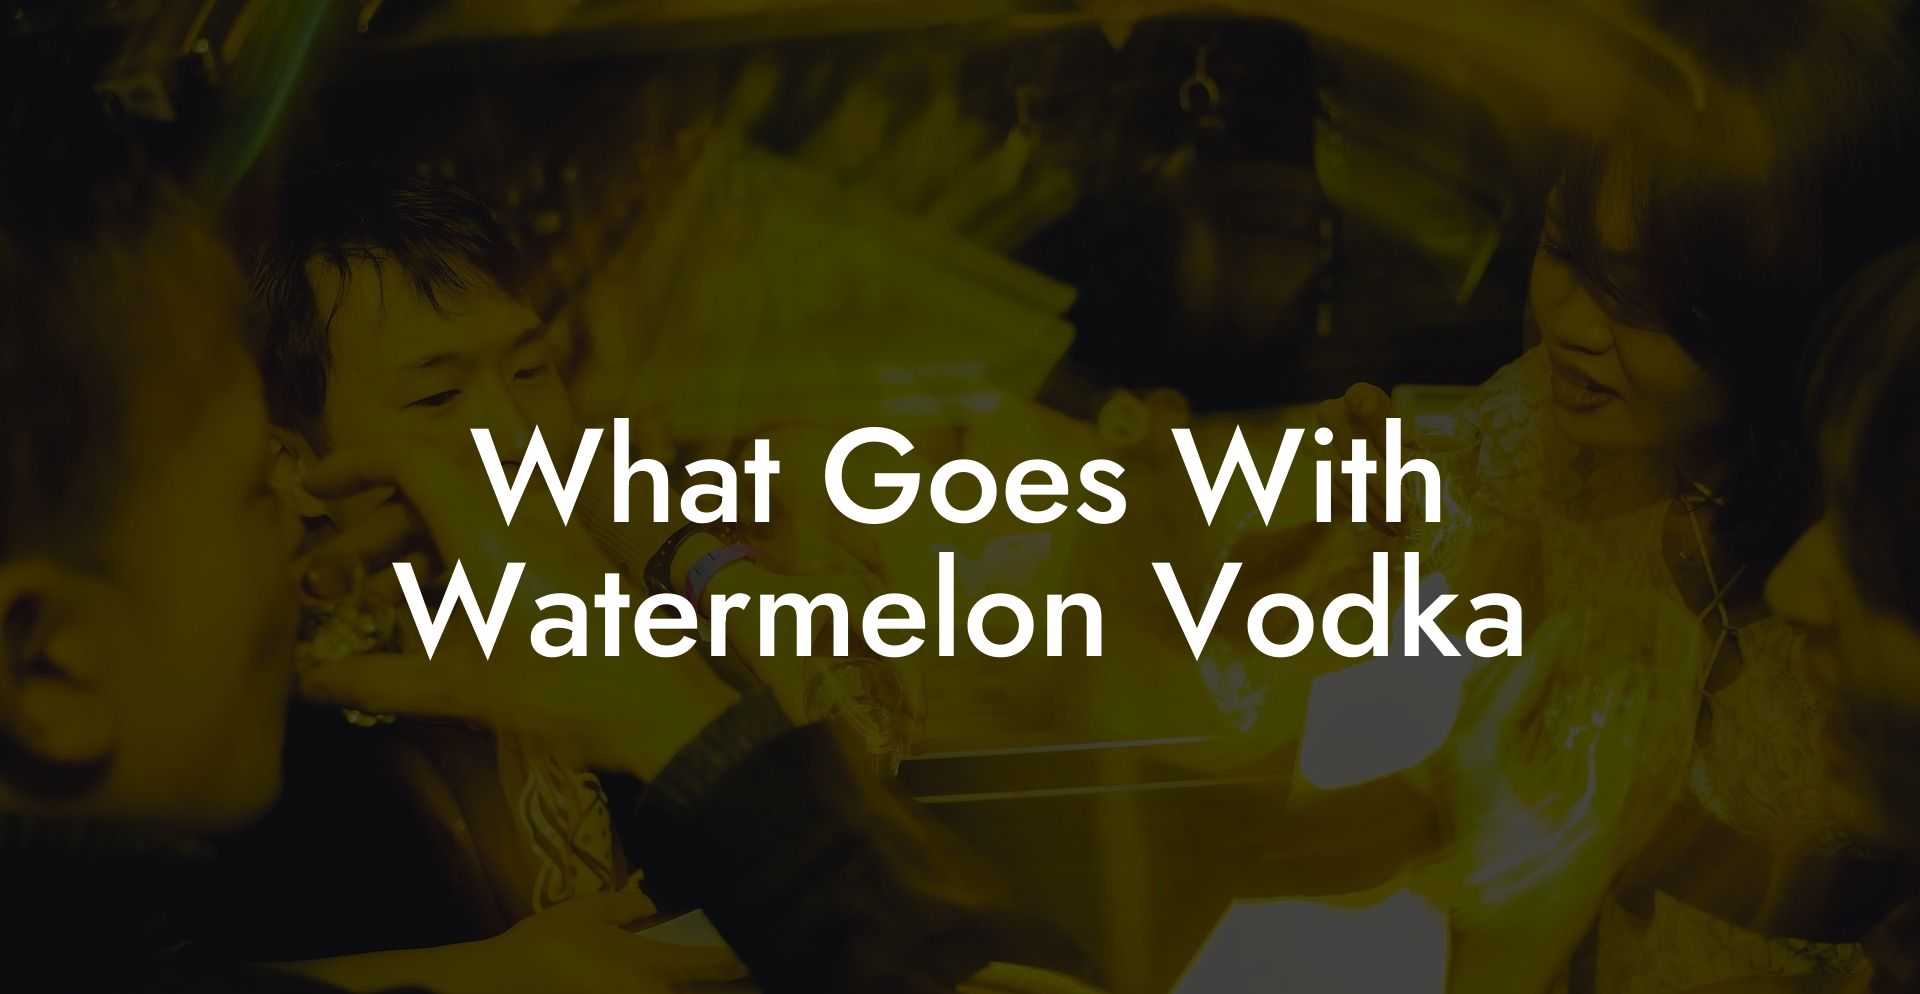 What Goes With Watermelon Vodka